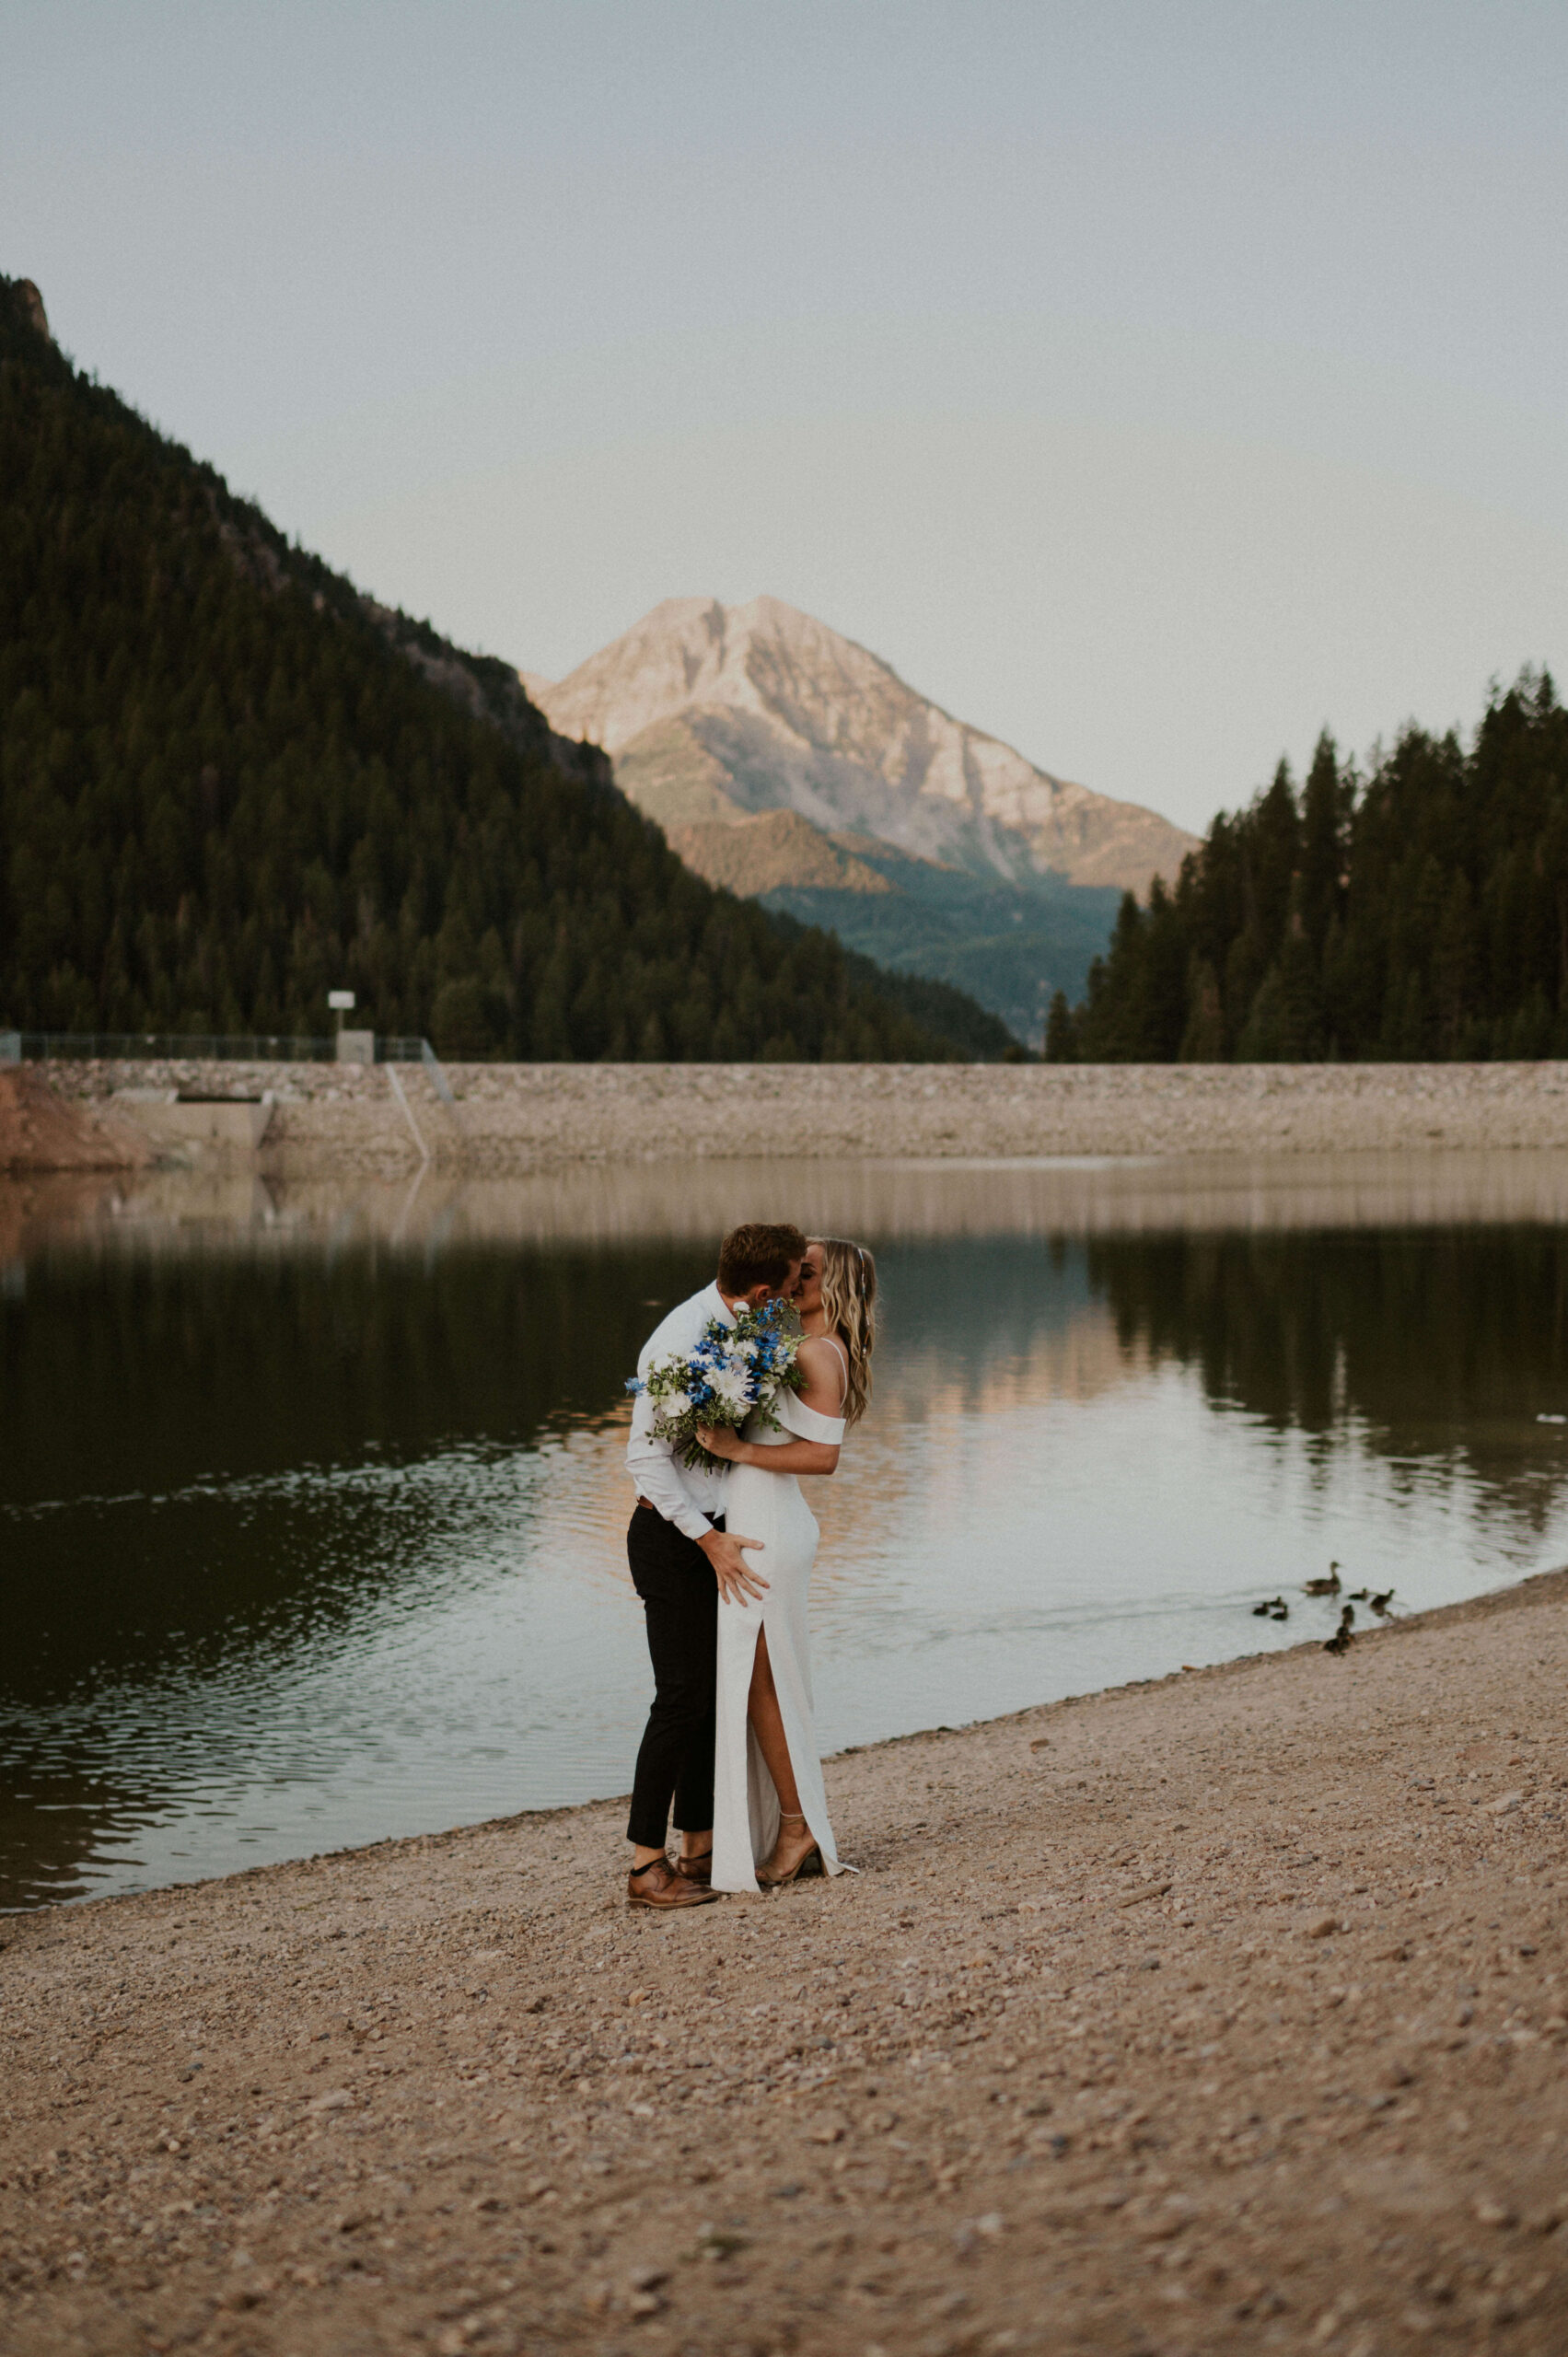 A couple elopes in Utah near a beautiful lake with a mountain in the background